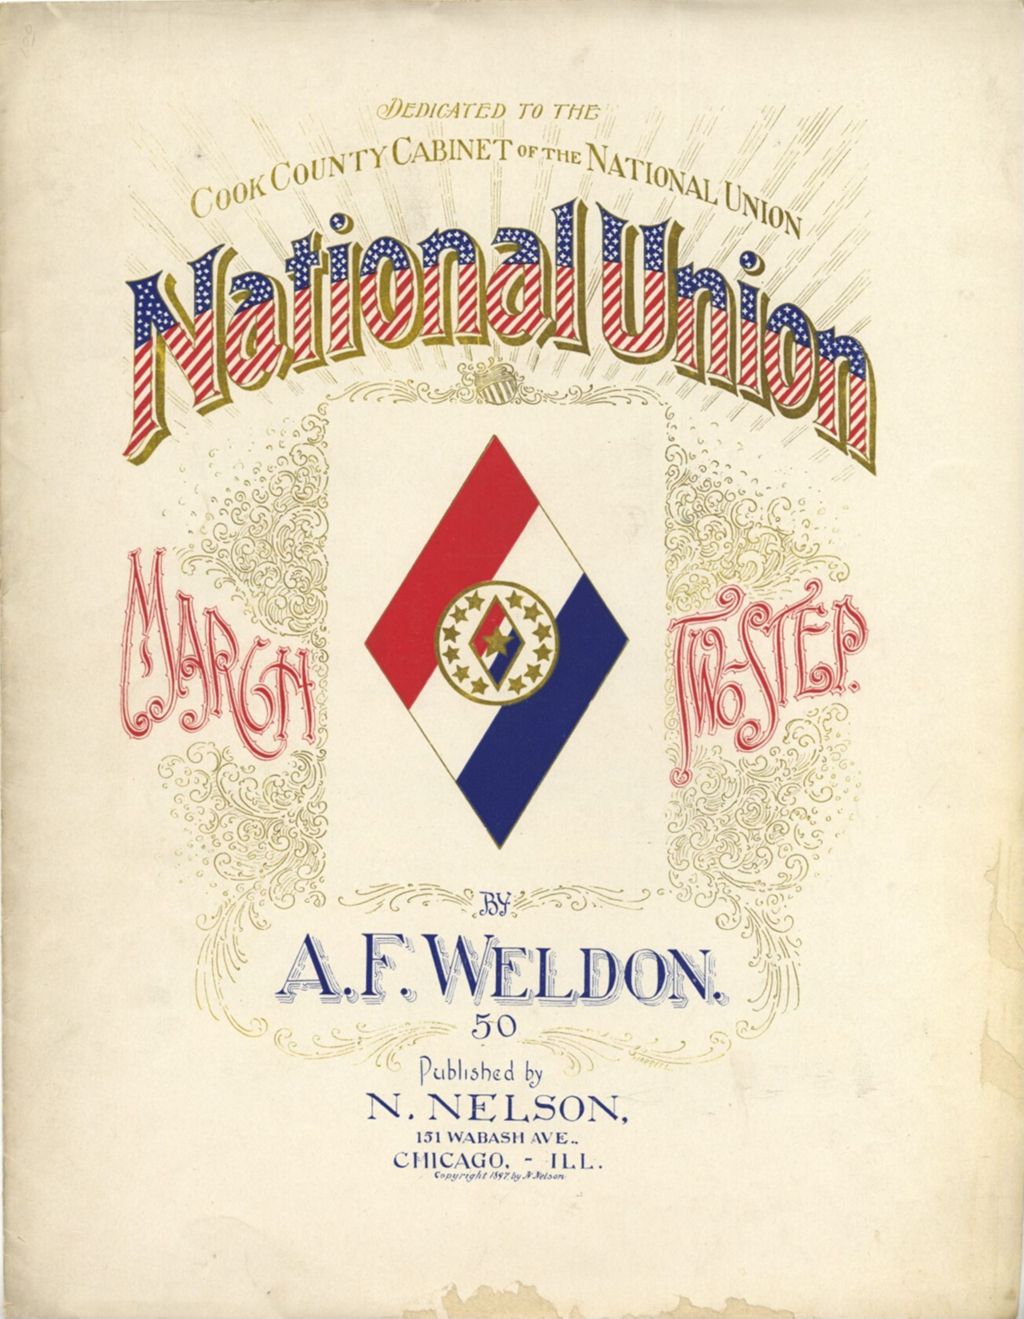 National Union (March Two-Step)